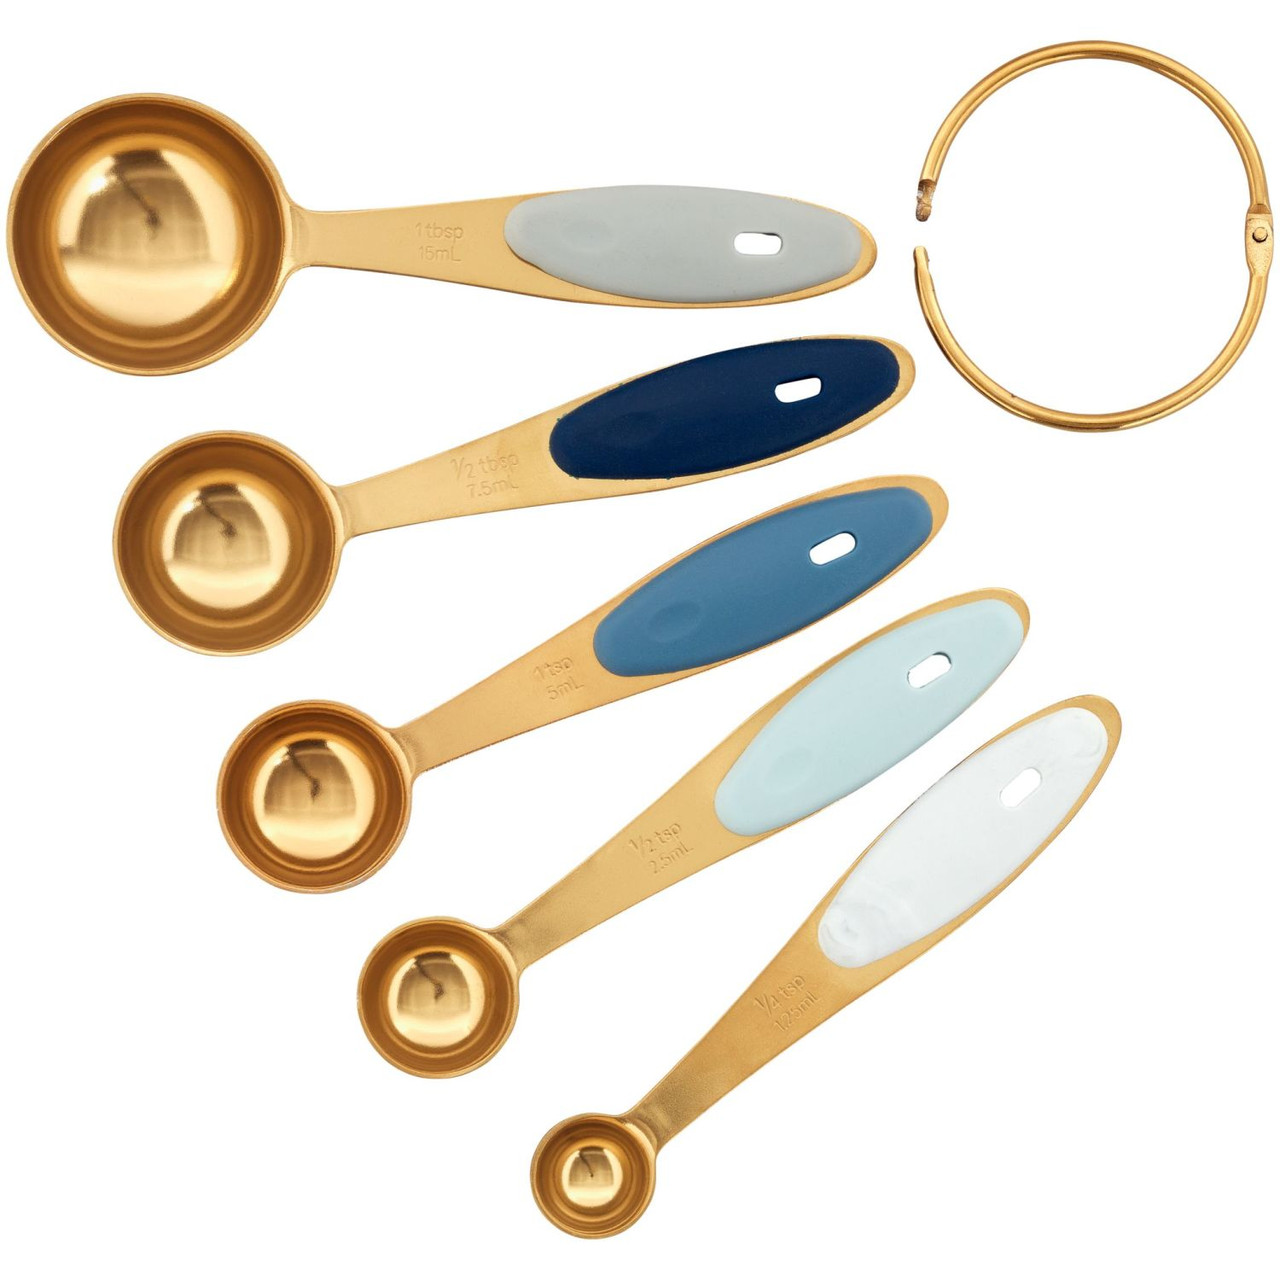 LIFETOWE Gold Measuring Cups and Spoons Set of 15, 18/8 Stainless Steel,  Includes 7 Nesting Metal Measuring Cups,8 Magnetic Measuring Spoons set 